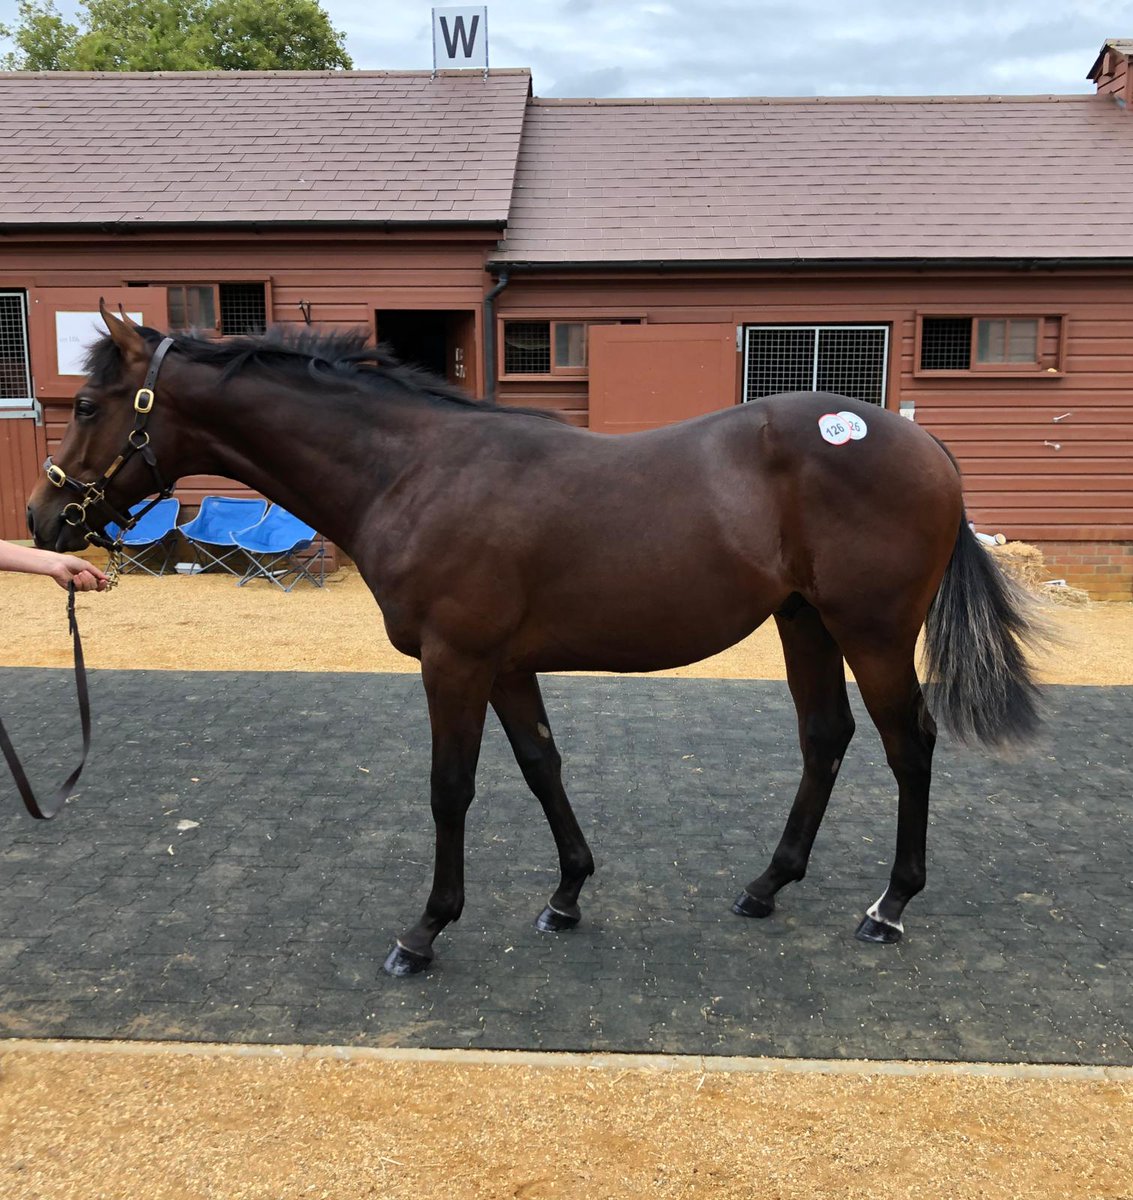 Replacement for London Calling in half with @Philcun69 @Richspencer89 yearling colt by Lethal Force. Called Red Fez, roll on #TommyCooper...hope racing more normal by the time he runs..